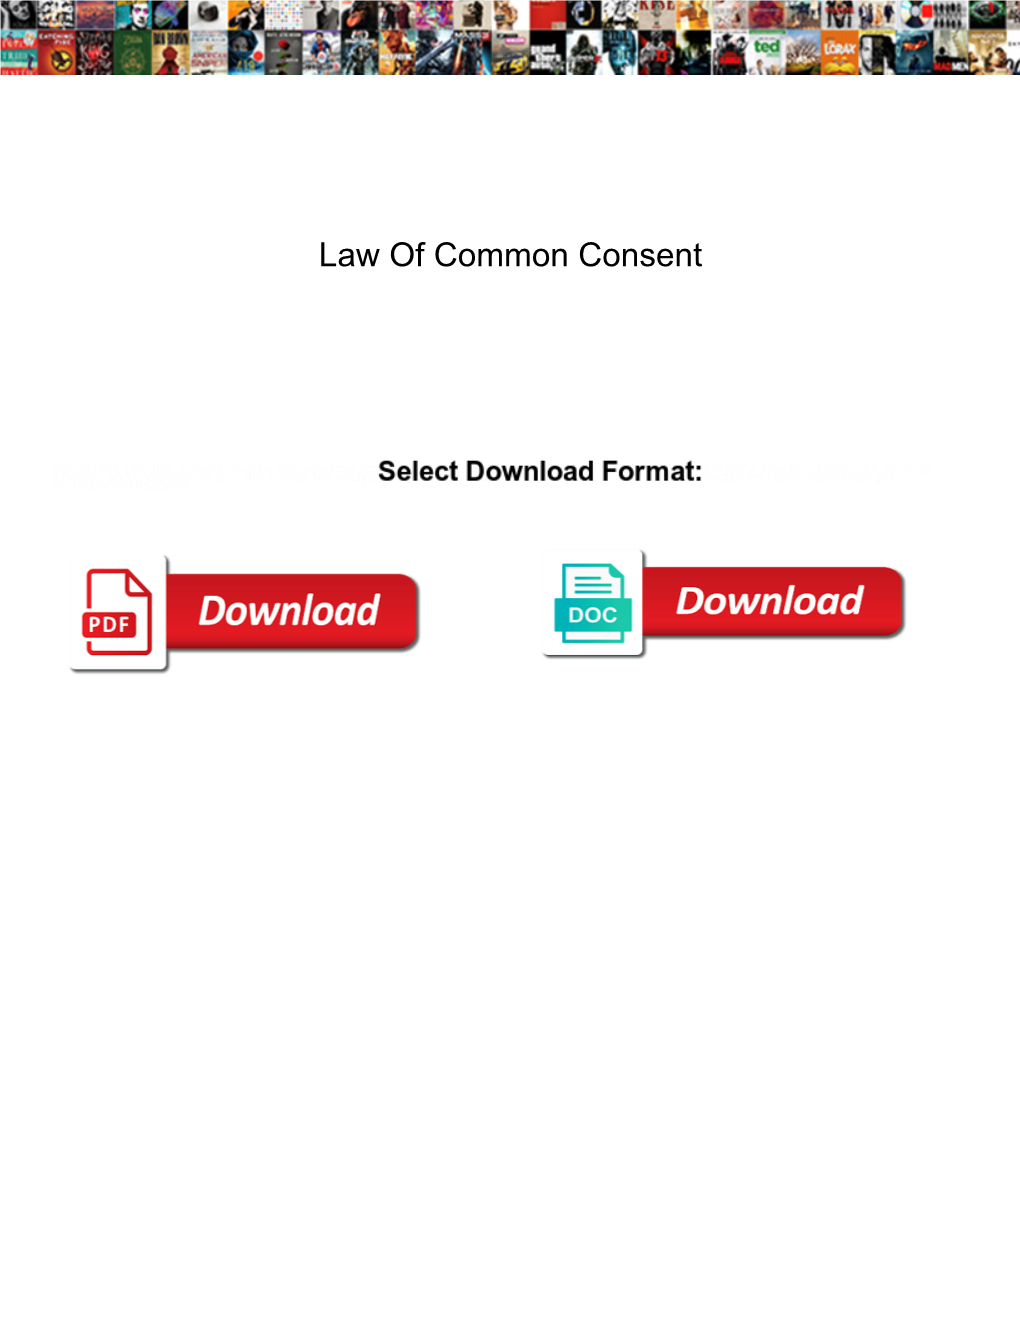 Law of Common Consent